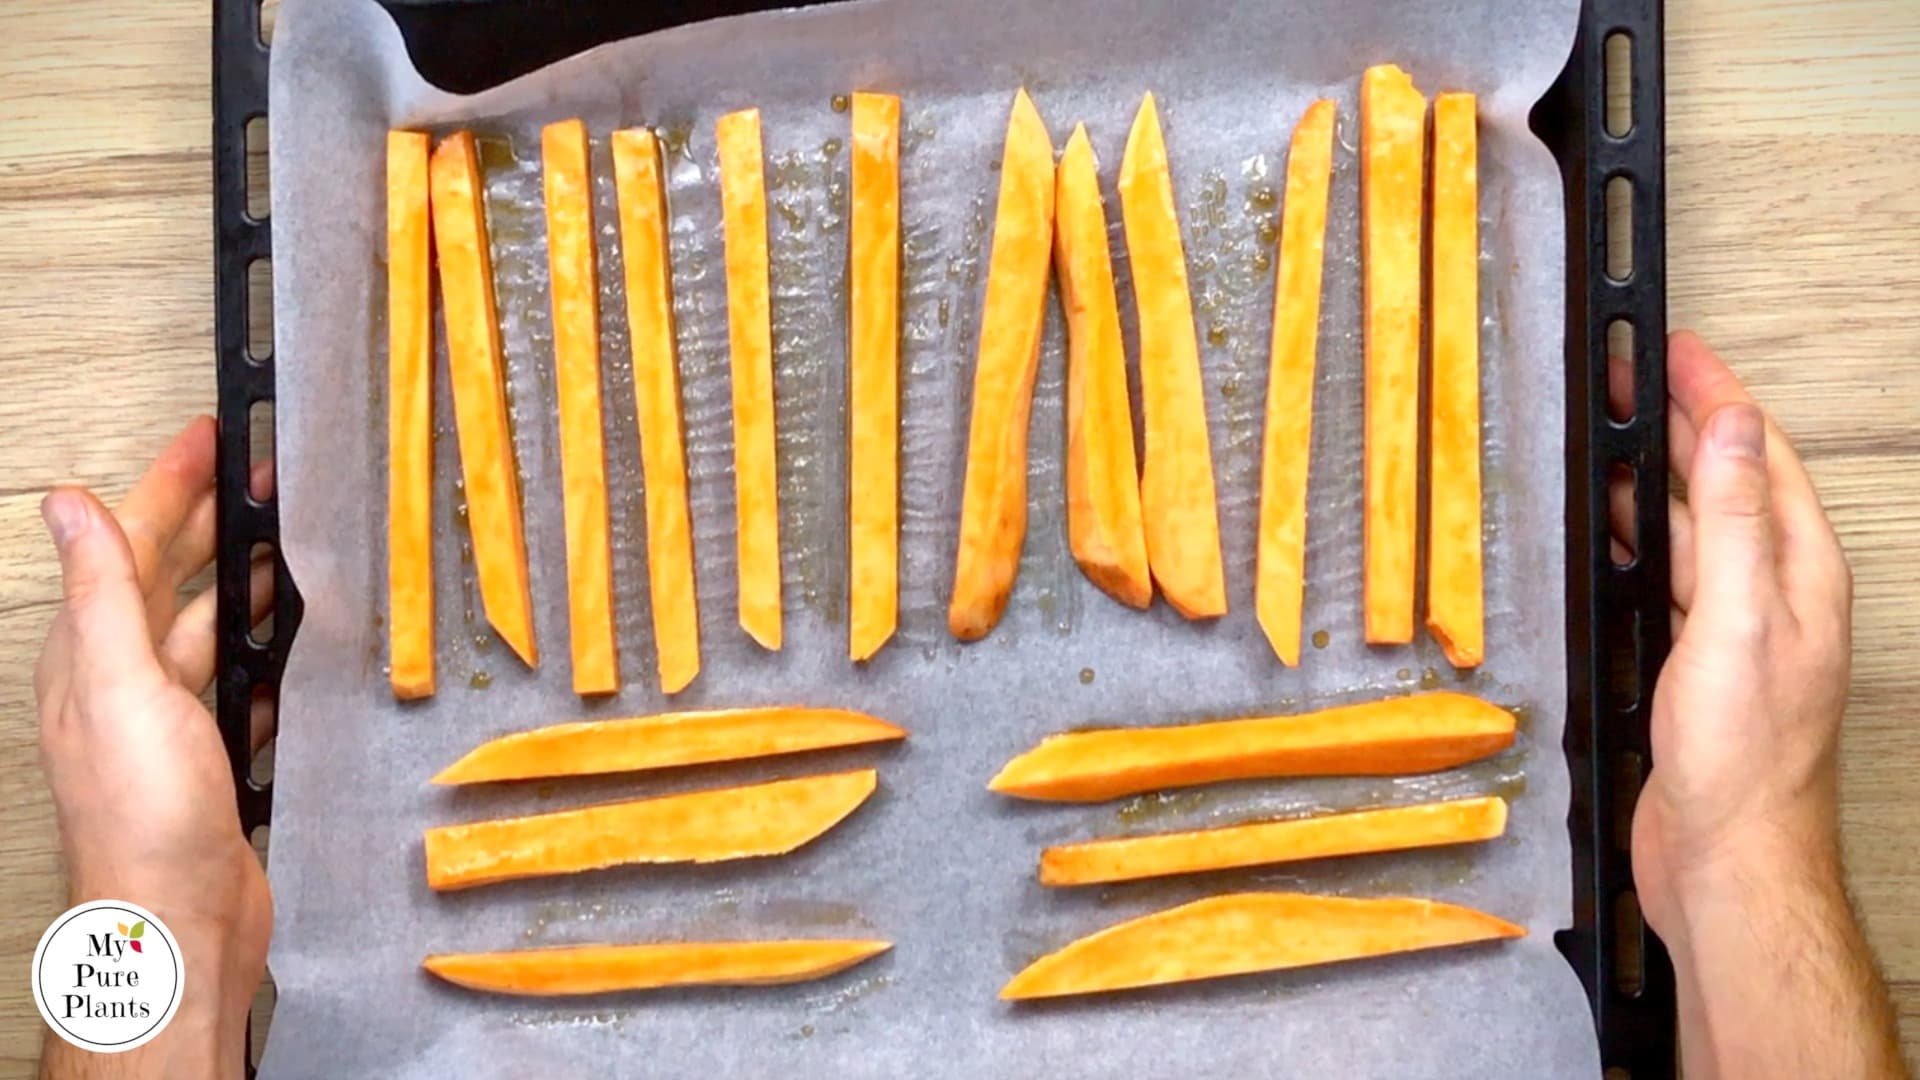 Sweet potato sticks are arranged in one layer on a parchment paper. A hand is holding the sheet pan to take it away for roasting.